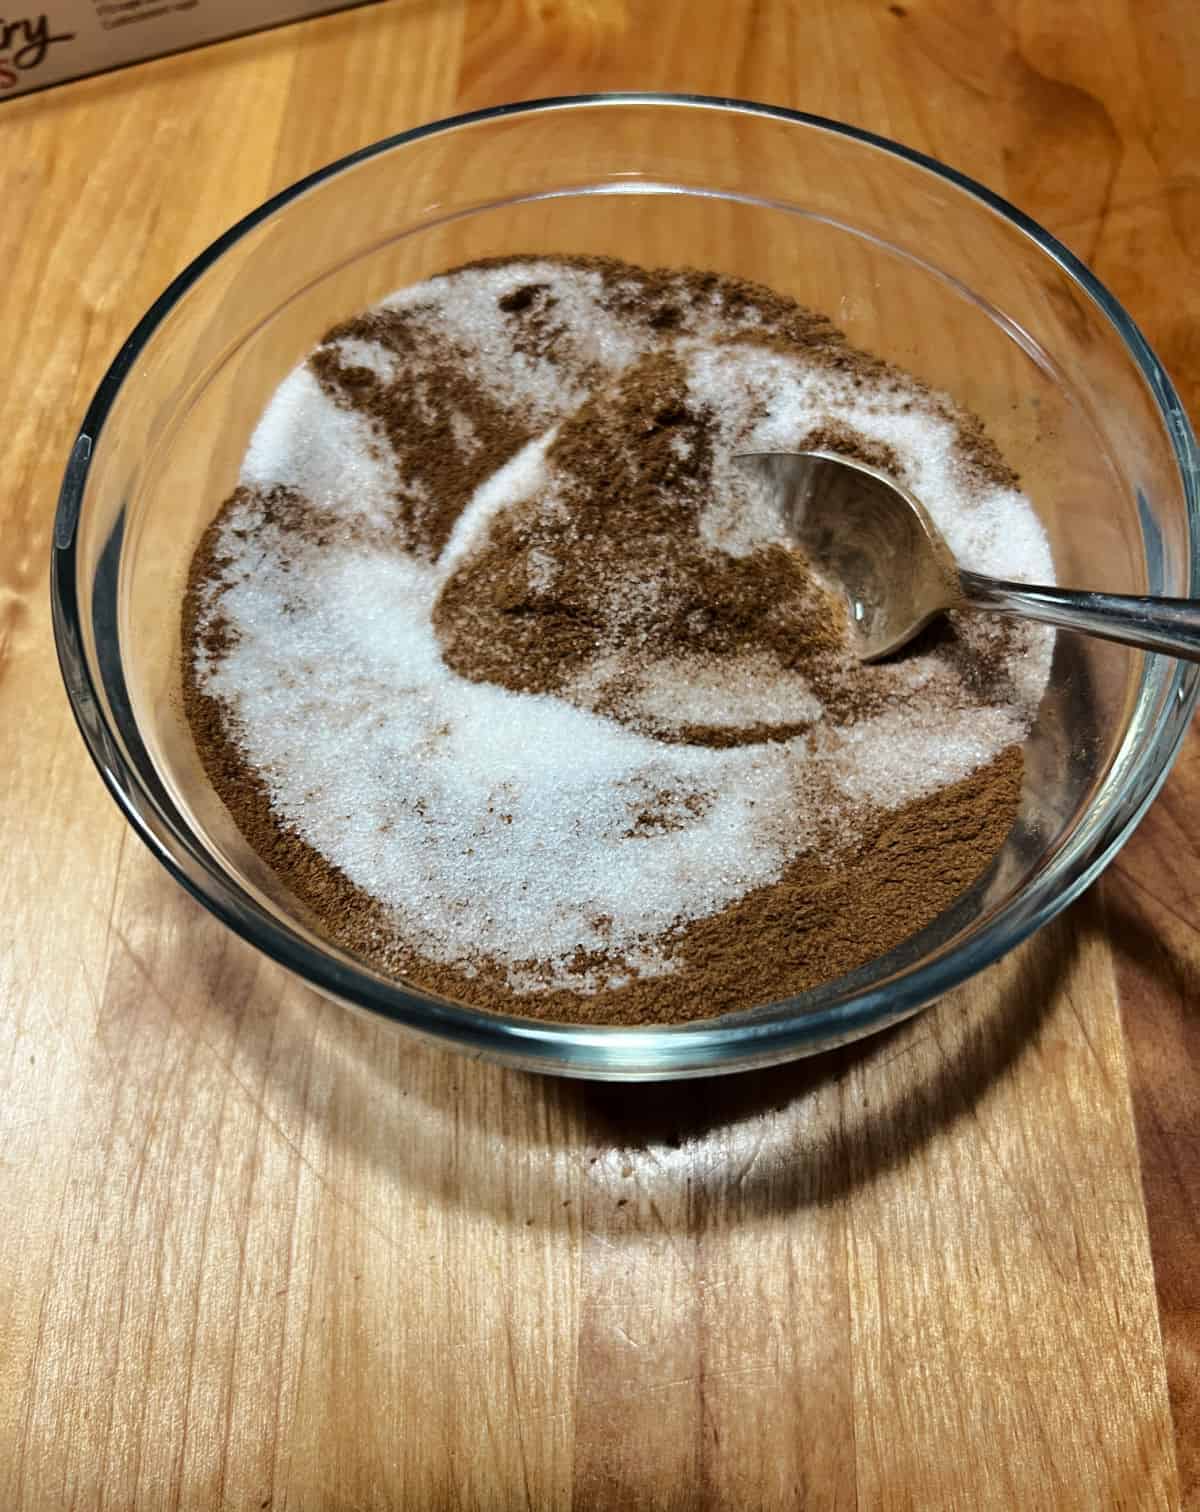 Mixing cinnamon and sugar in a small bowl.